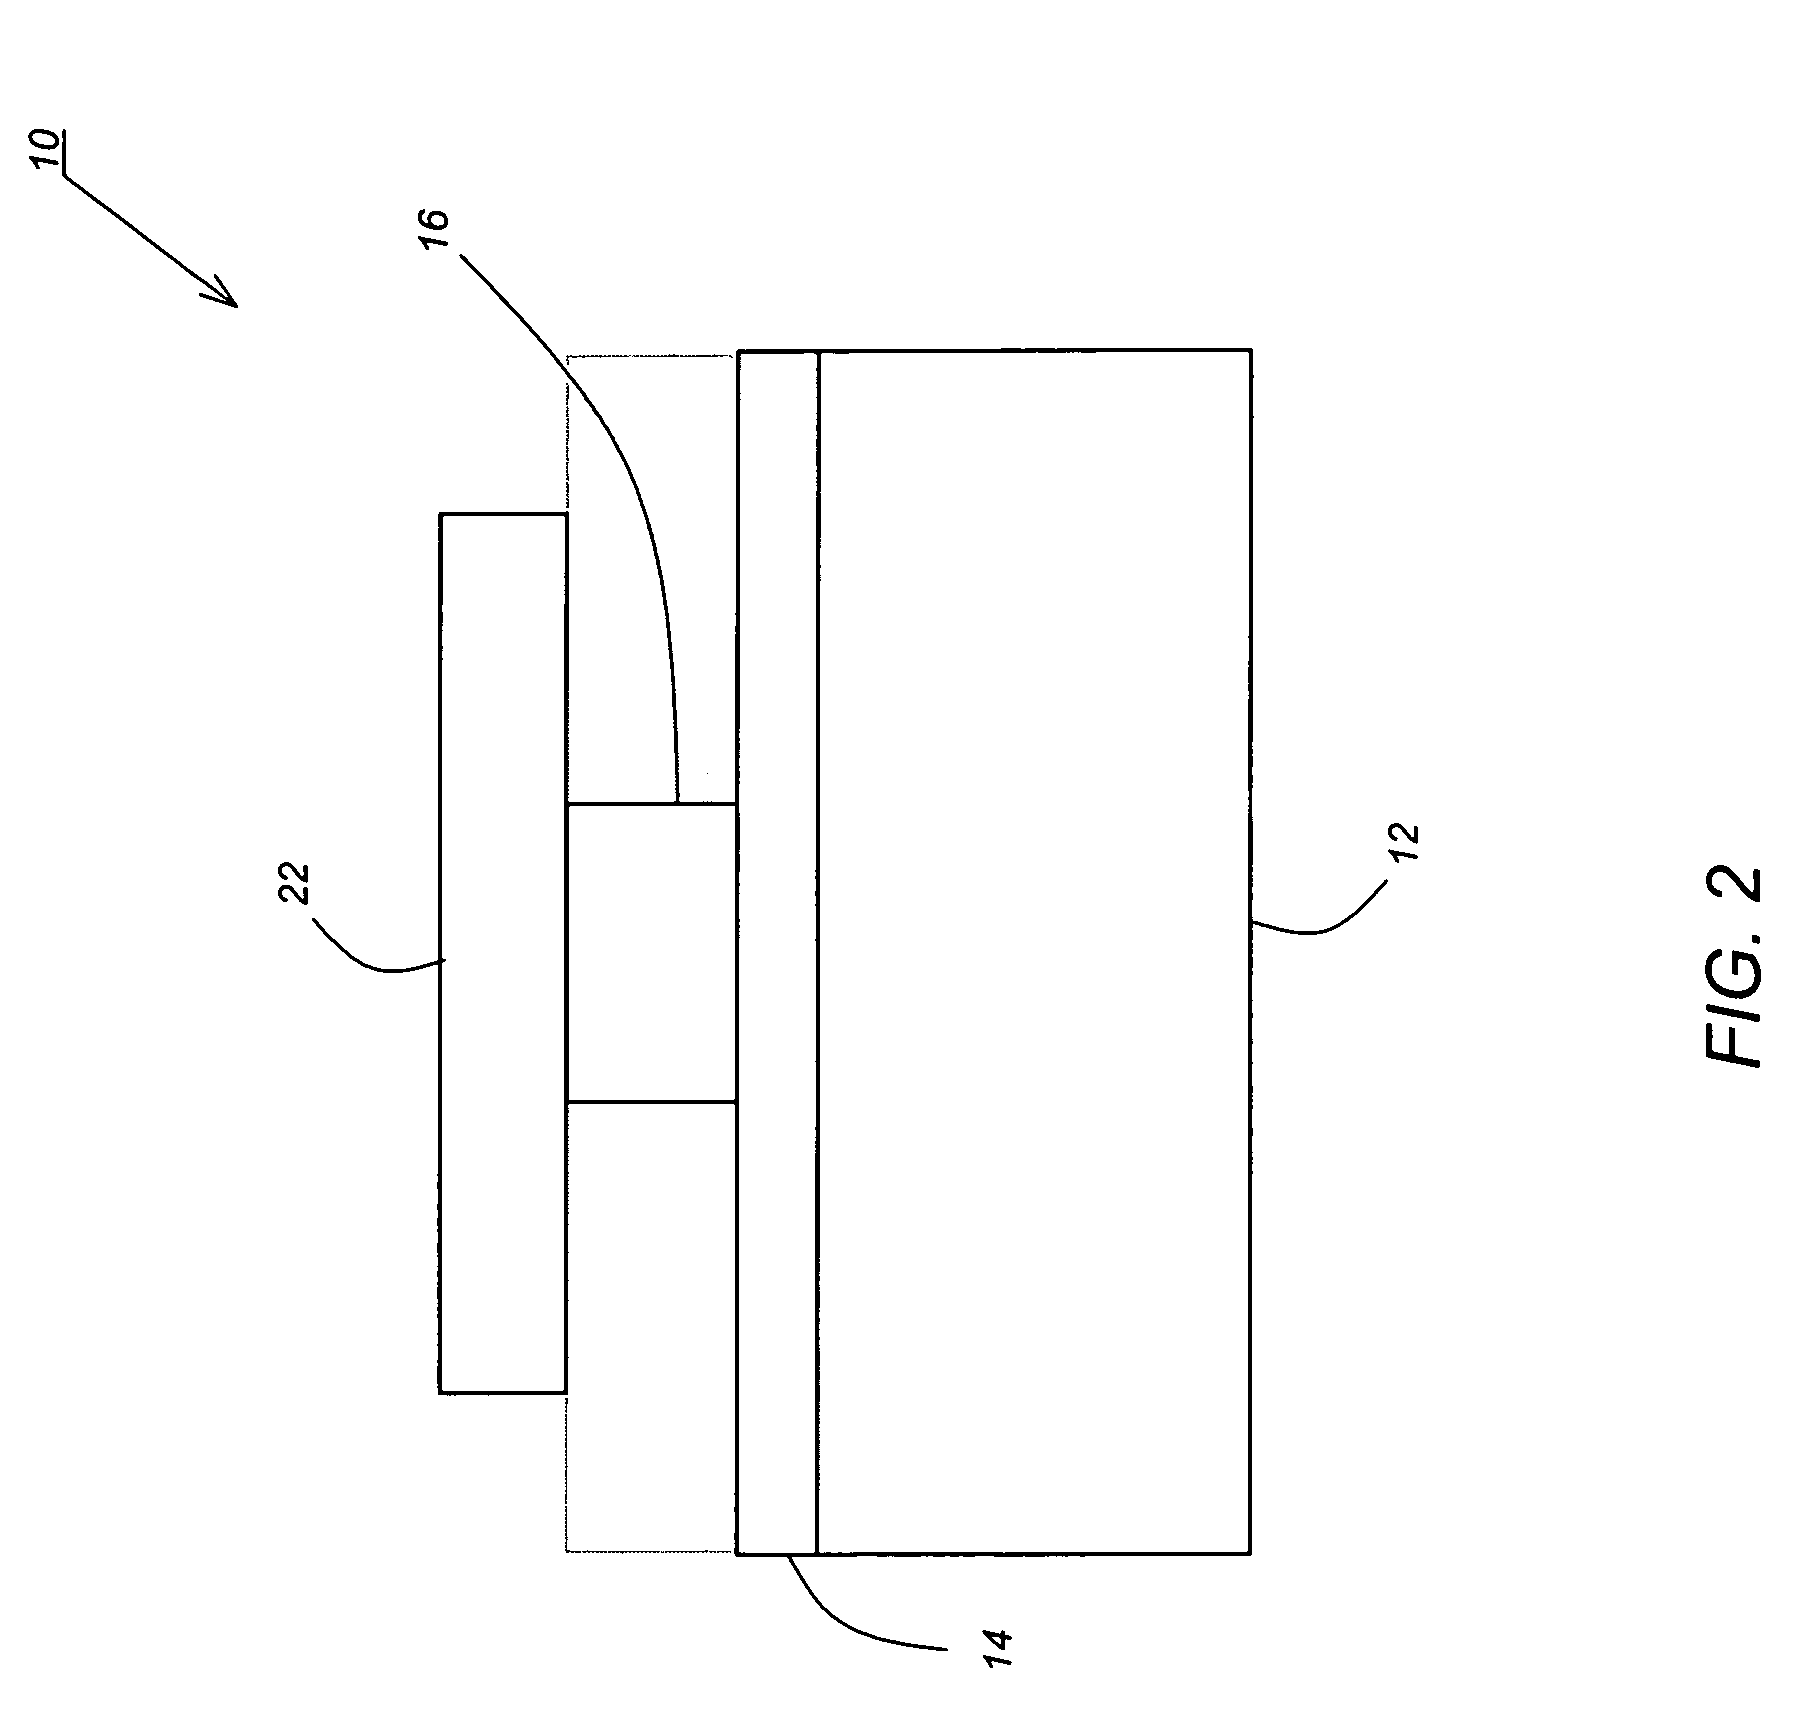 Photonic device with segmented absorption design